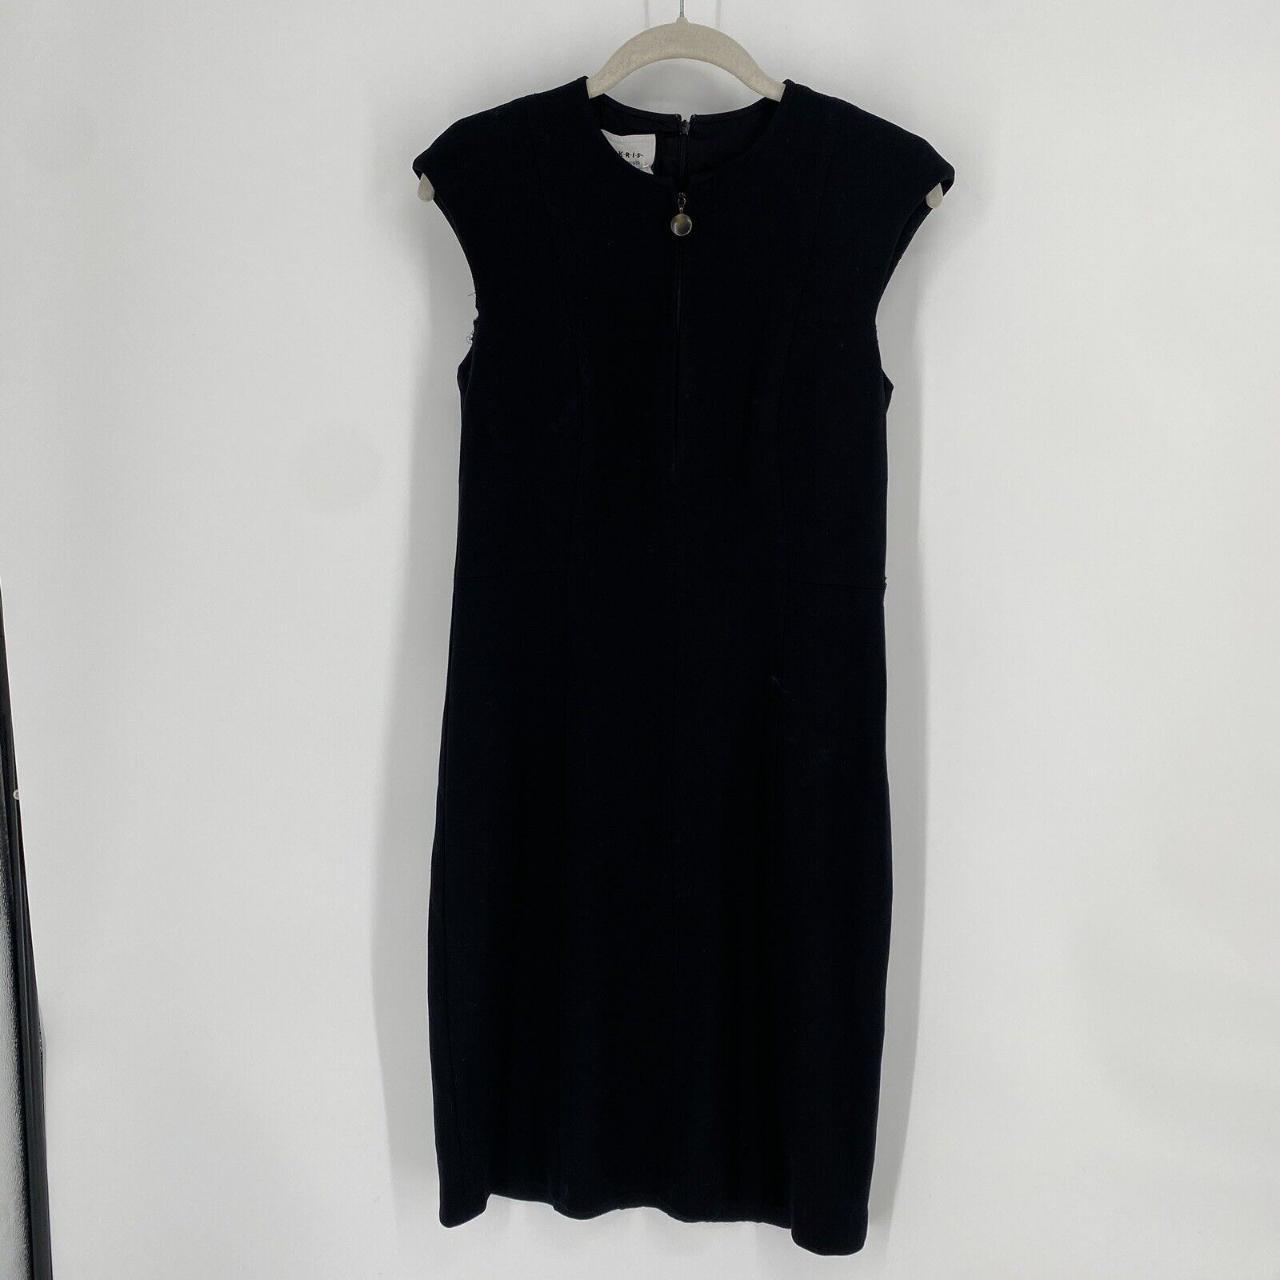 item listed by thecanarycloset